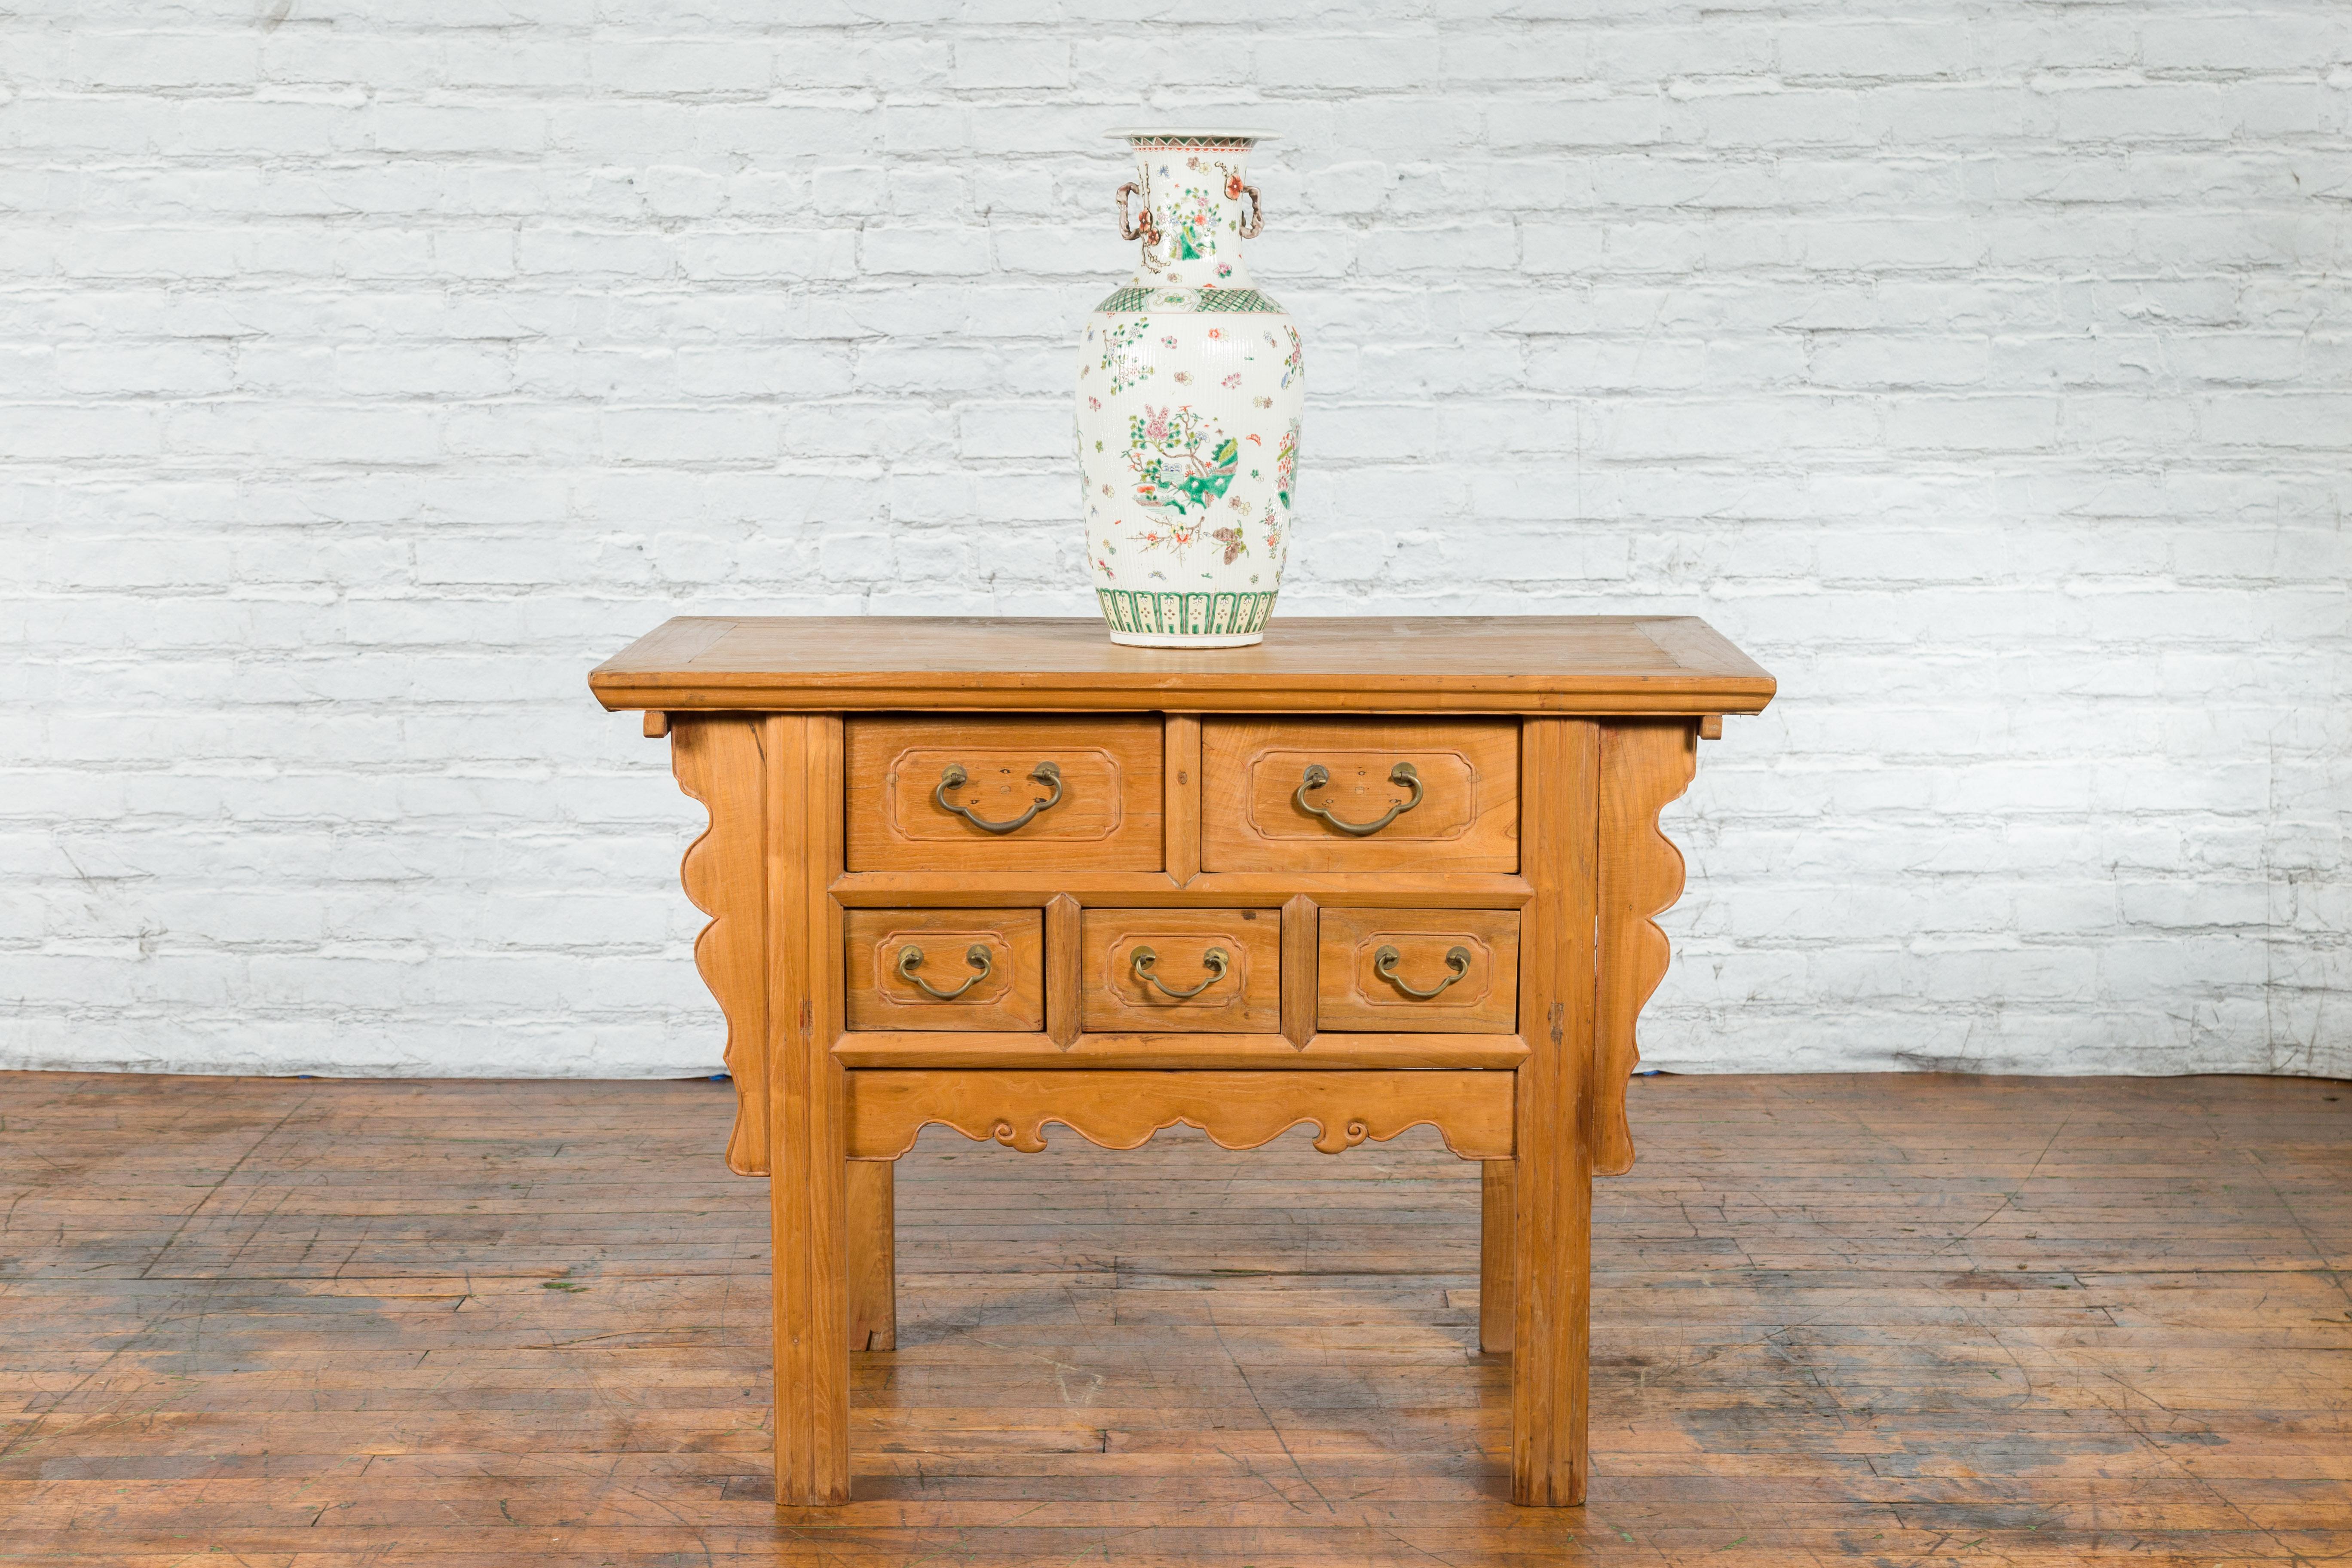 A Chinese Qing Dynasty period side table from the 19th century, with five drawers, carved apron and bronze hardware. Created in China during the Qing Dynasty, this side table captures our attention with its elegant silhouette and warm patina. The